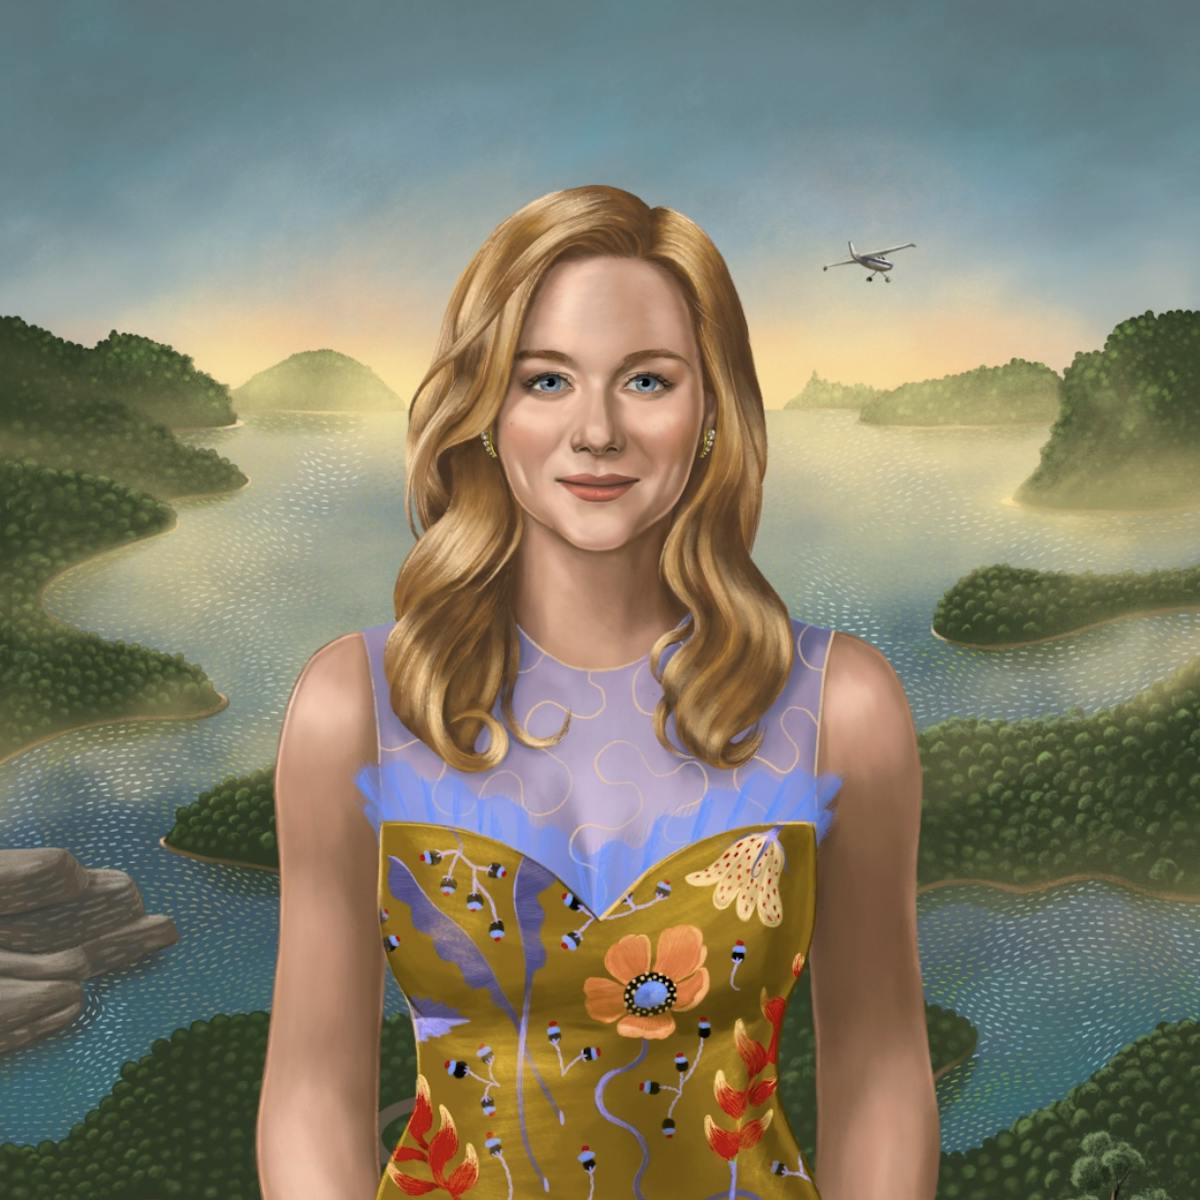 This beautiful illustration by Shyama Golden shows Wendy (Laura Linney), stood in front of the landscape of the Ozarks.  A small plane crosses over the misty mountains and lakes behind her as the sun rises.  She is wearing a sleeveless floral dress, her blonde wavy hair framing her face.